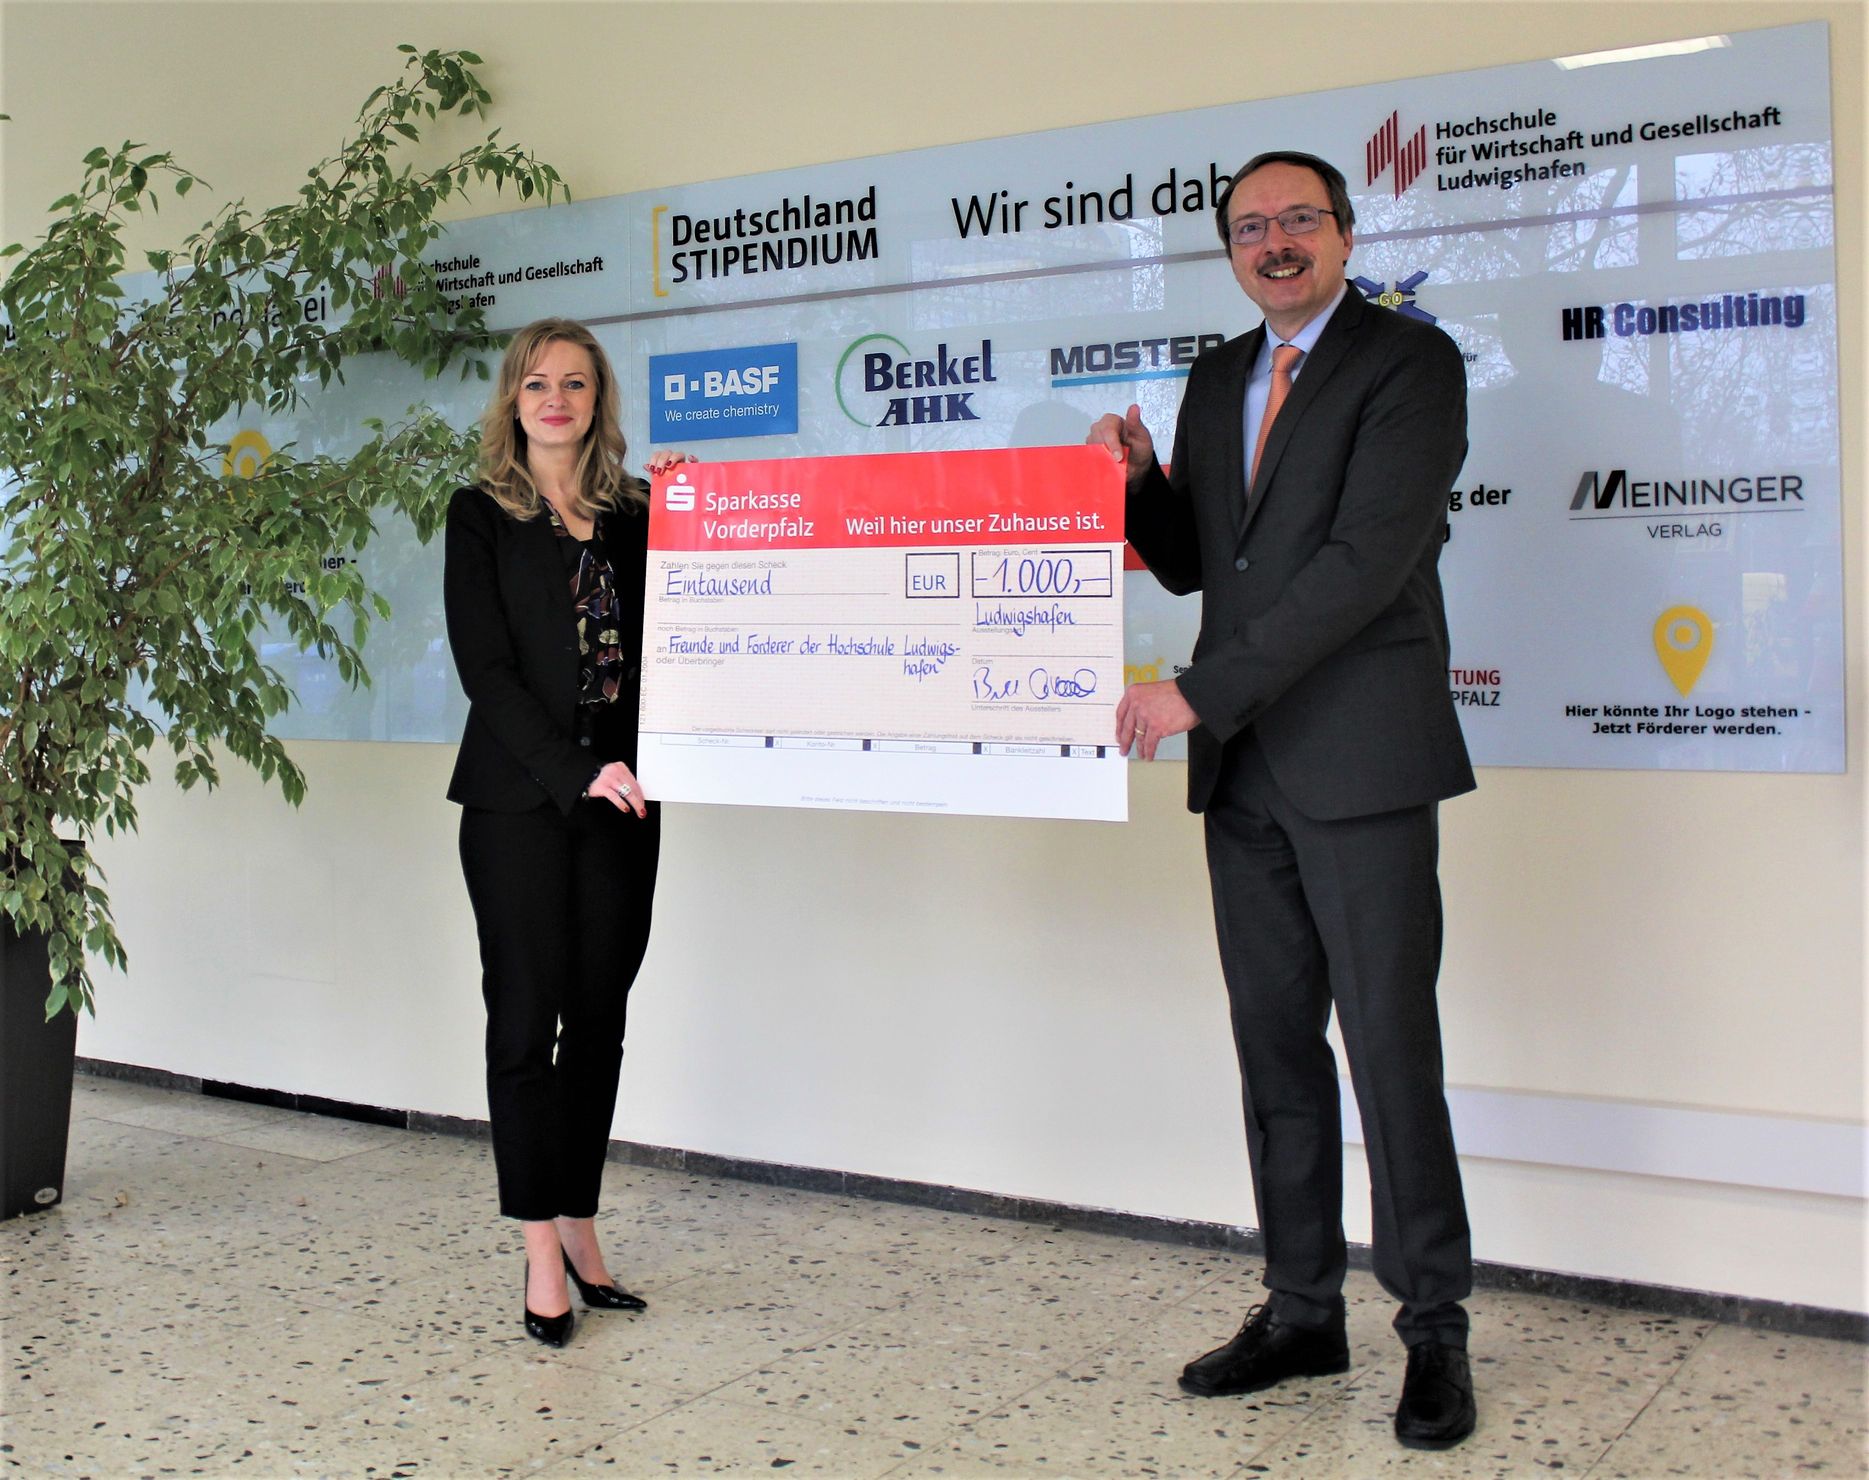 Tatjana Kamrad, Head of Human Resources Development and Training at Sparkasse Vorderpfalz, and University President Prof. Dr. Peter Mudra at the symbolic presentation of the donation check yesterday at HWG LU. (Image: HWG LU)